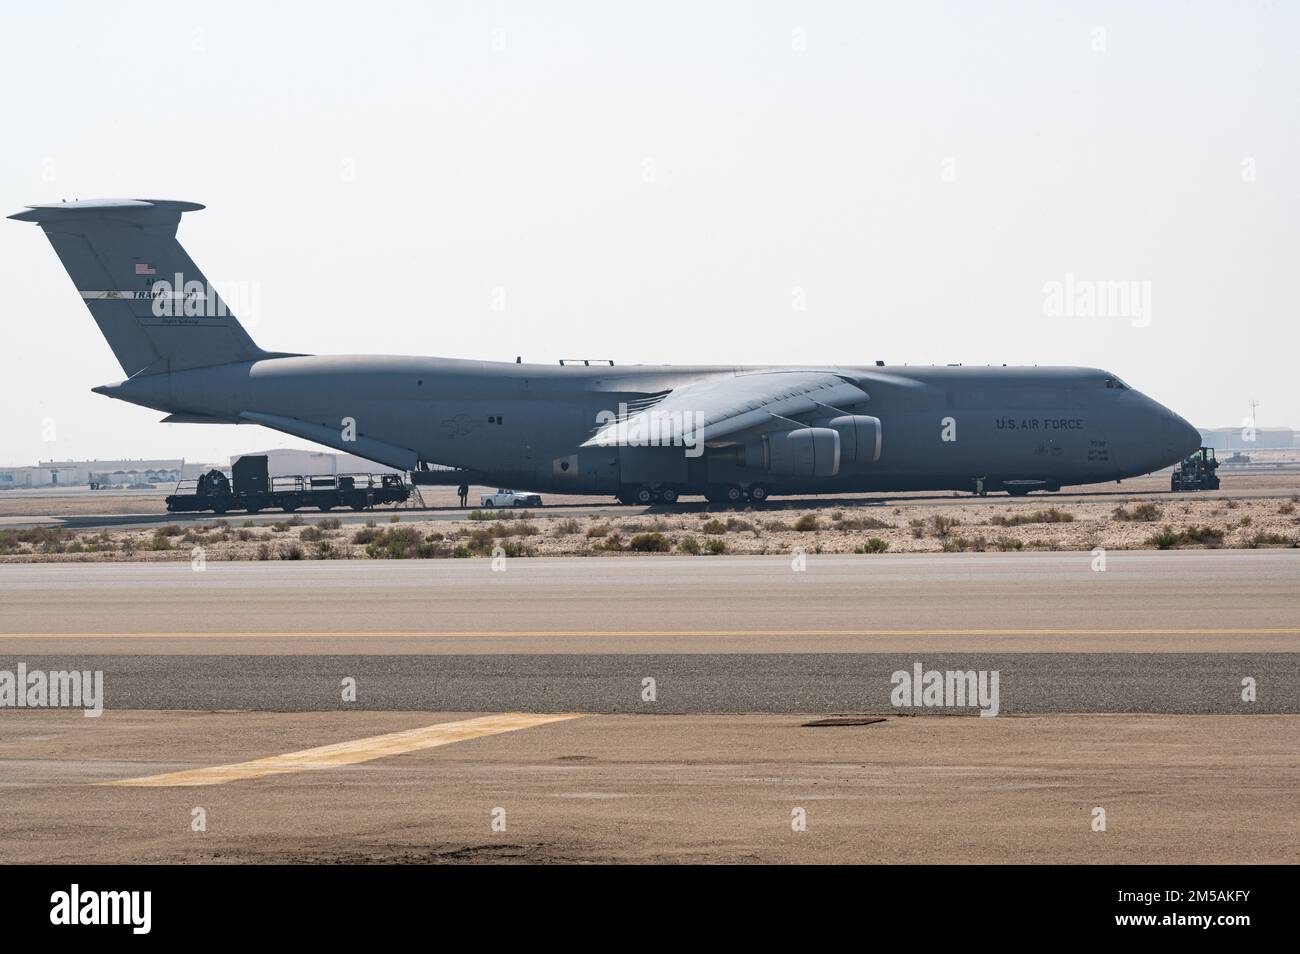 A U.S. Air Force C-5M Super Galaxy from the 60th Air Mobility Wing, Travis Air Force Base, takes on cargo at Al Dhafra Air Base, United Arab Emirates, Feb. 16, 2022. The C-5 is a strategic transport aircraft used to transport cargo and personnel for the Department of Defense. Stock Photo